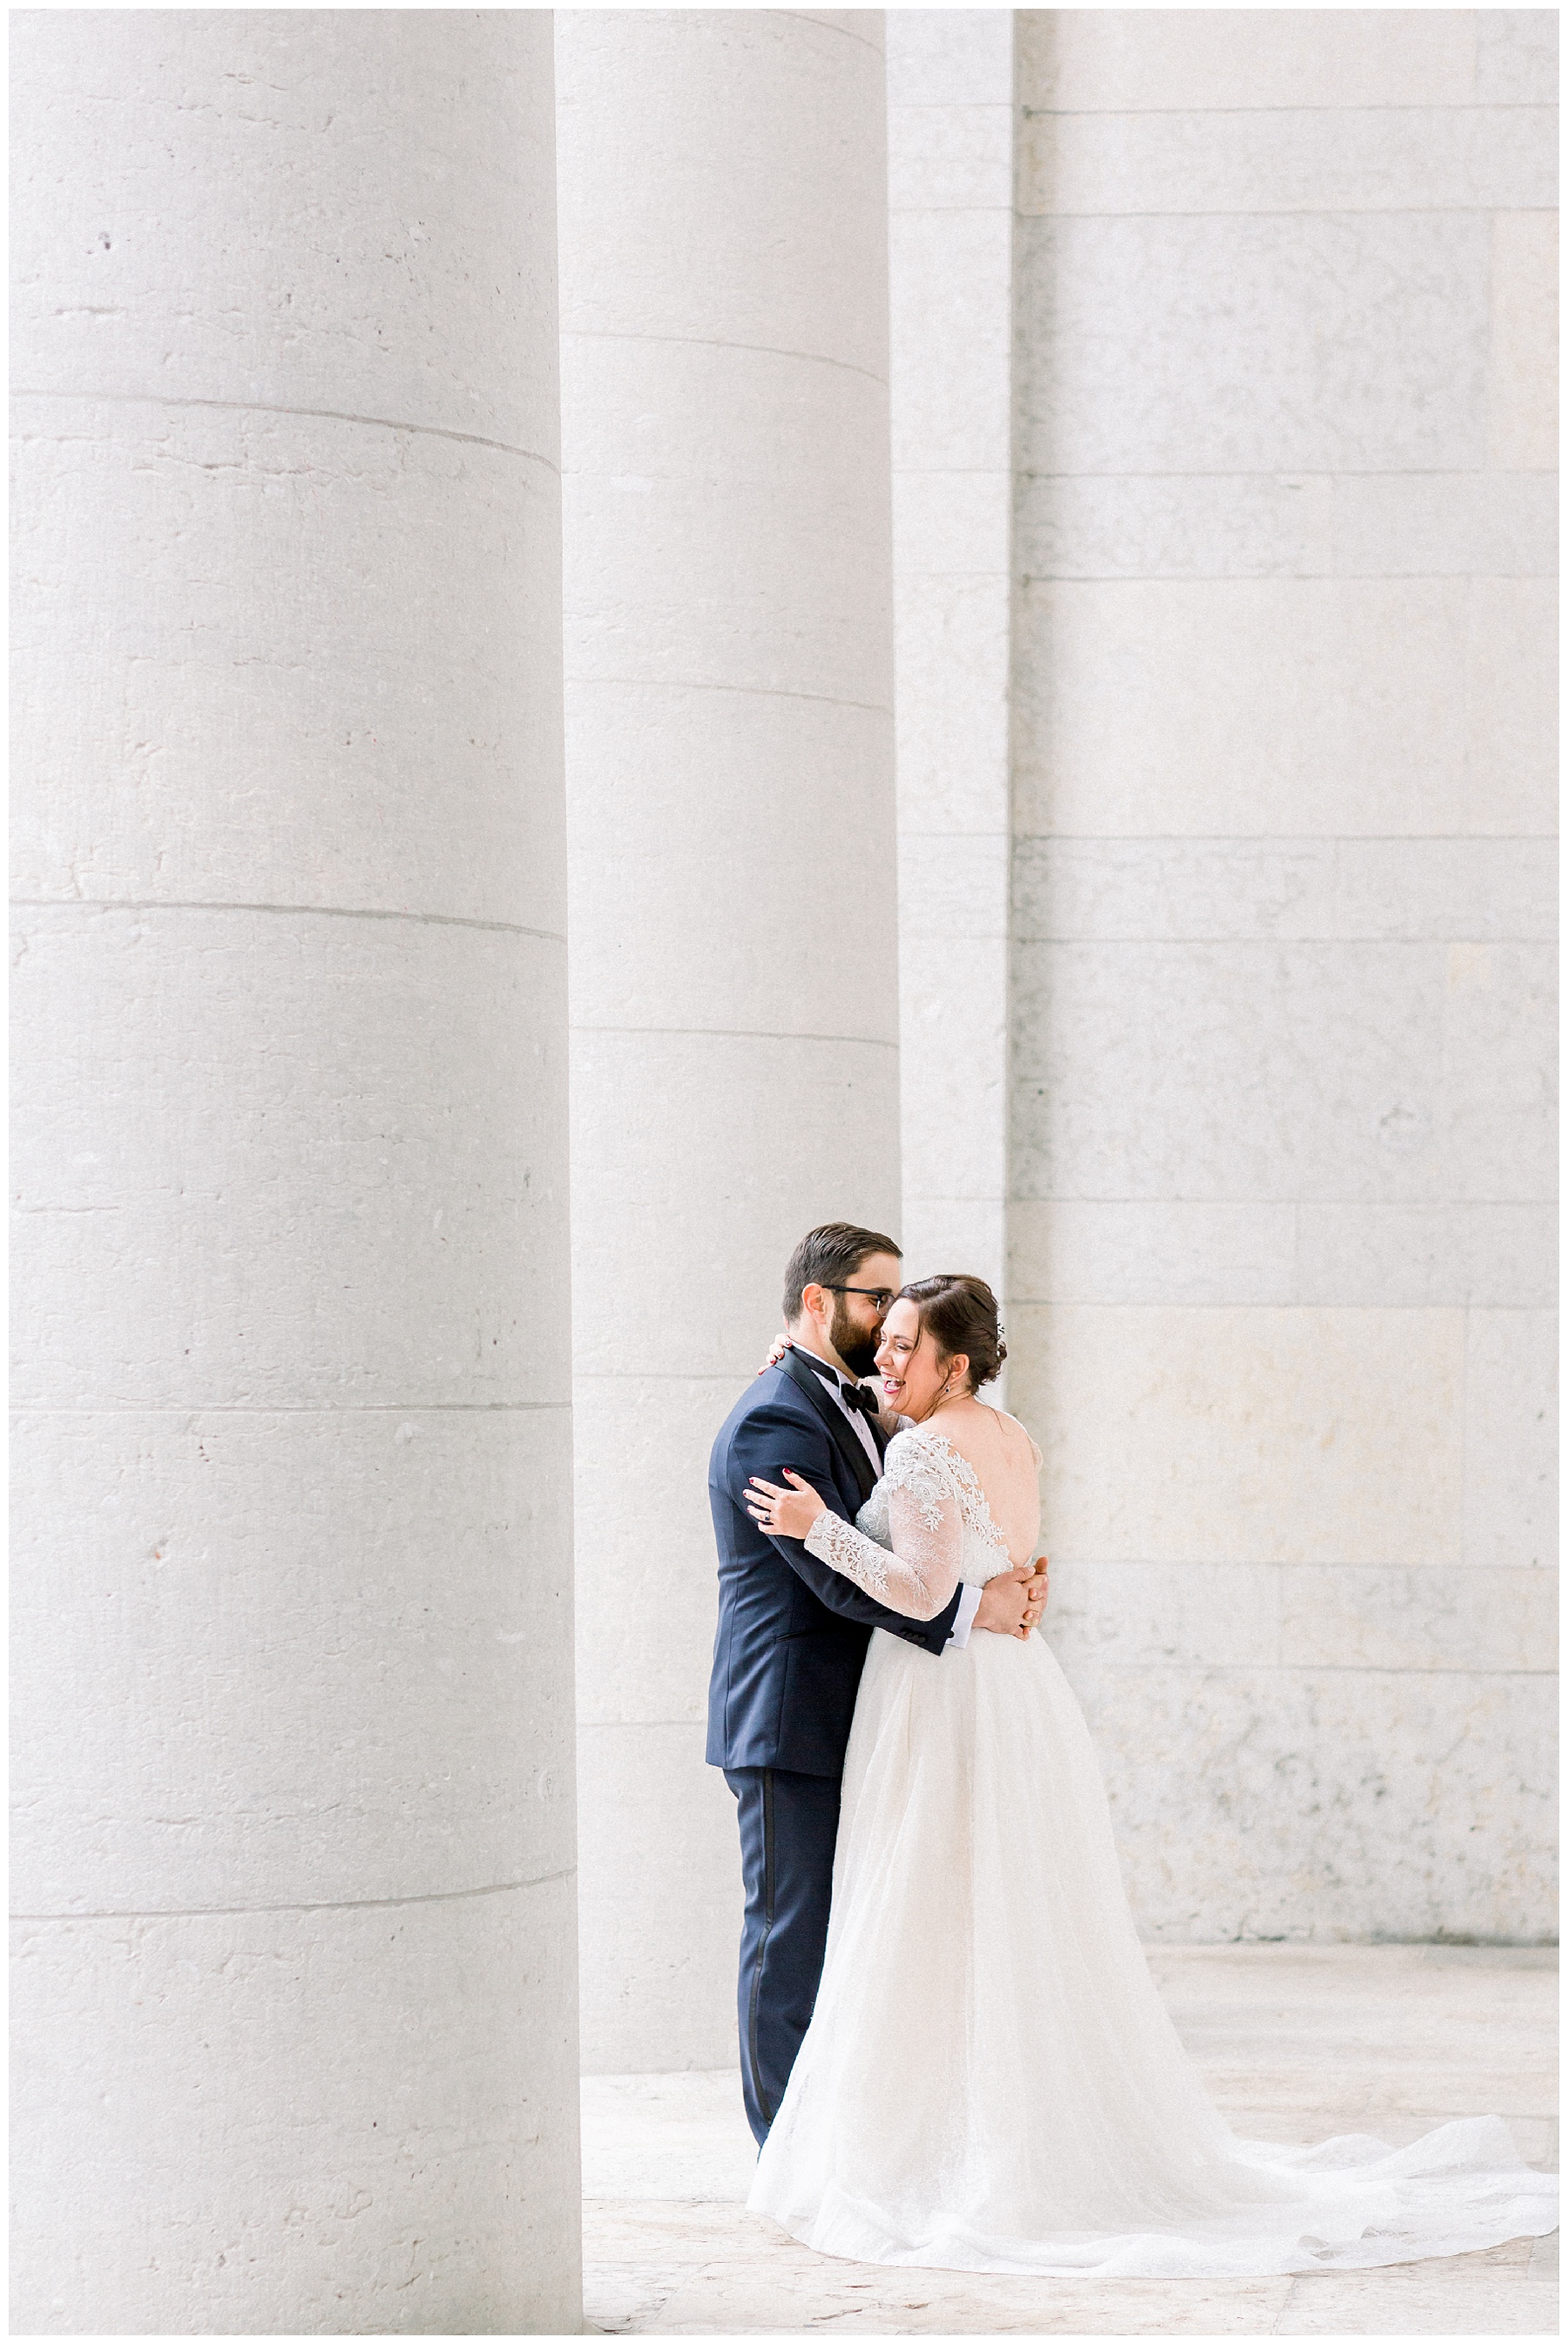 Halloween Wedding at the Boat House at Confluence Park in Columbus Ohio. Ohio Statehouse Bride and Groom Portraits